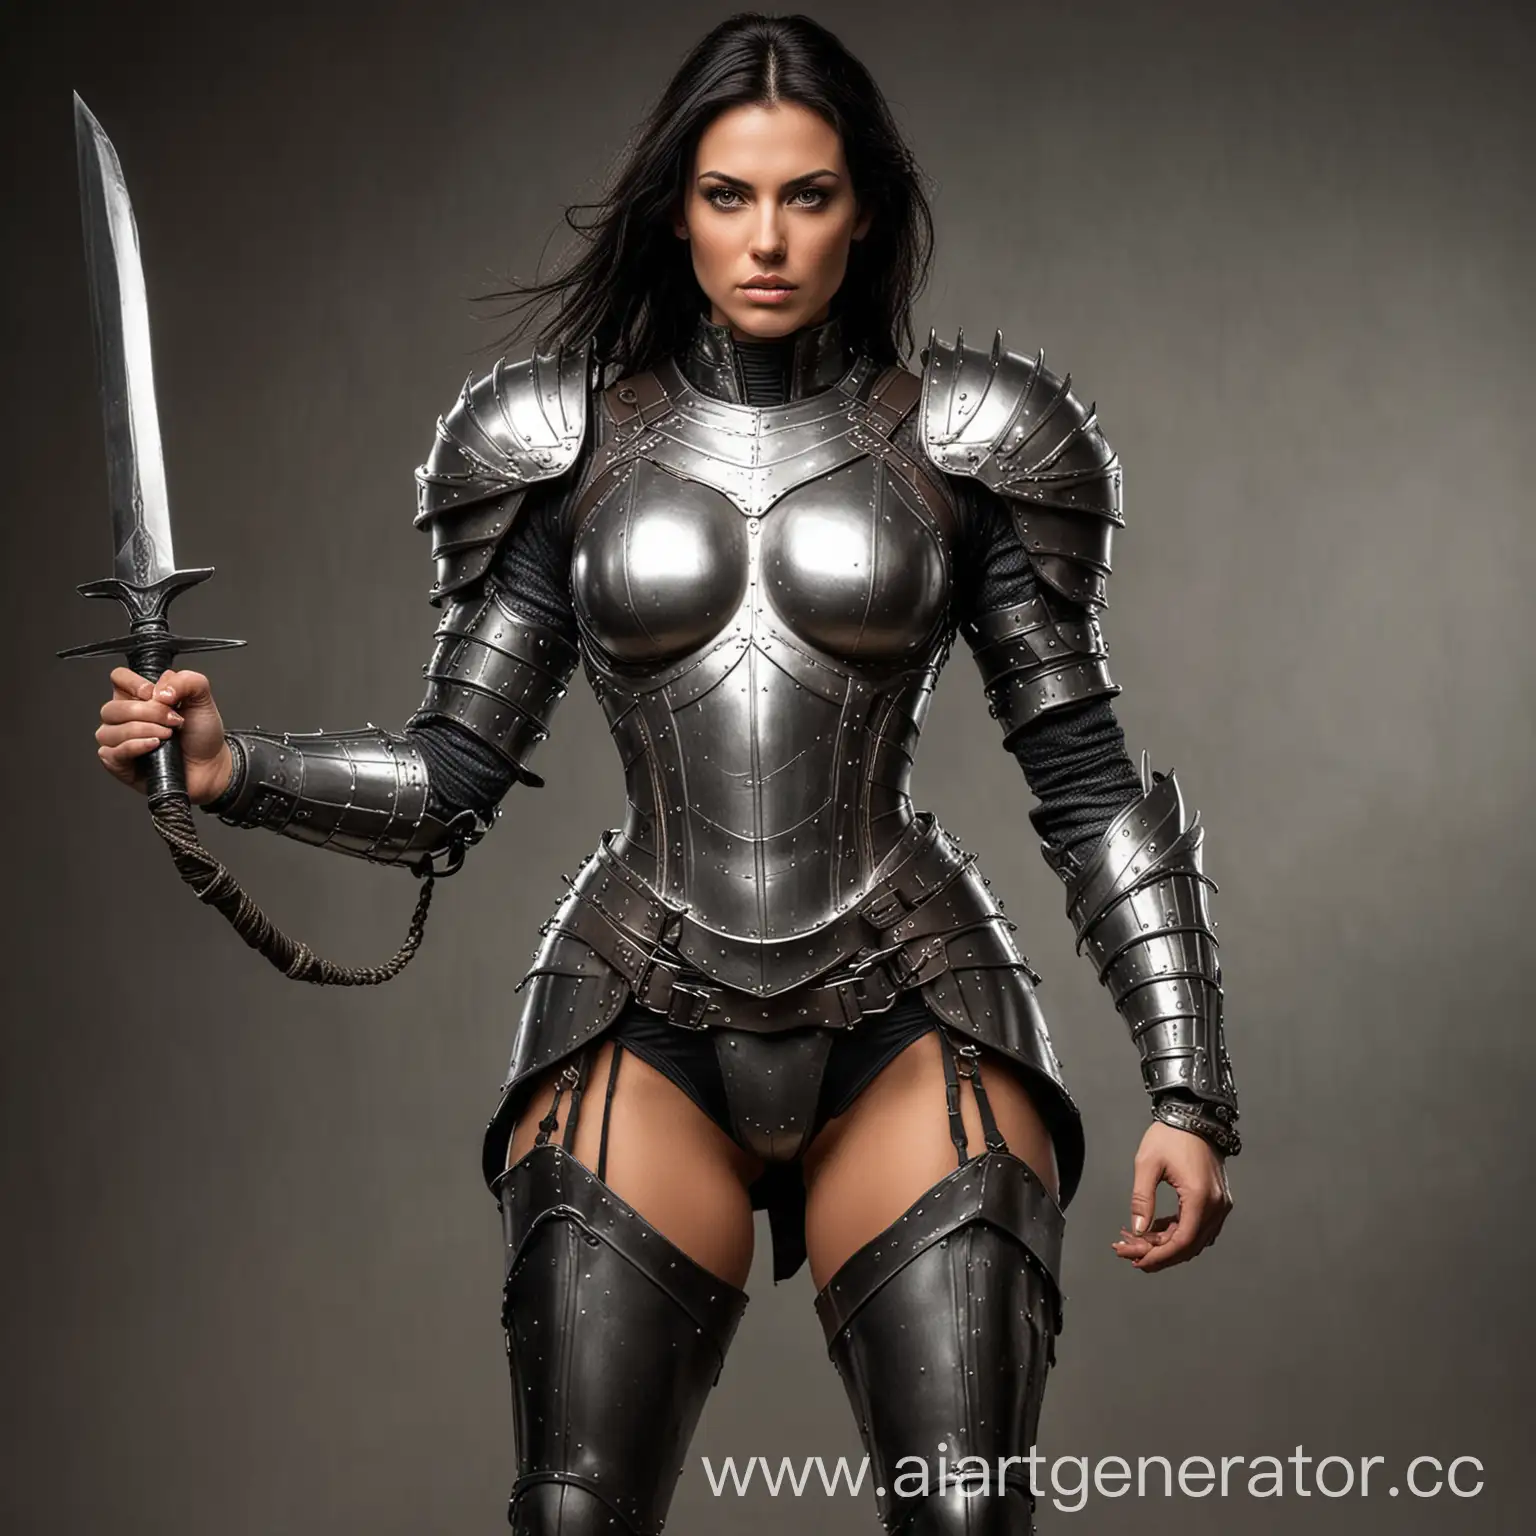 a tall muscular woman with dark hair, dressed in light leather armor, strengthened by steel plates, a woman should have a very good and outstanding figure. her face should show a playful and flirting expression, there should be a whip in the right hand. necessarily! the armor should close as much as possible, protect the character well